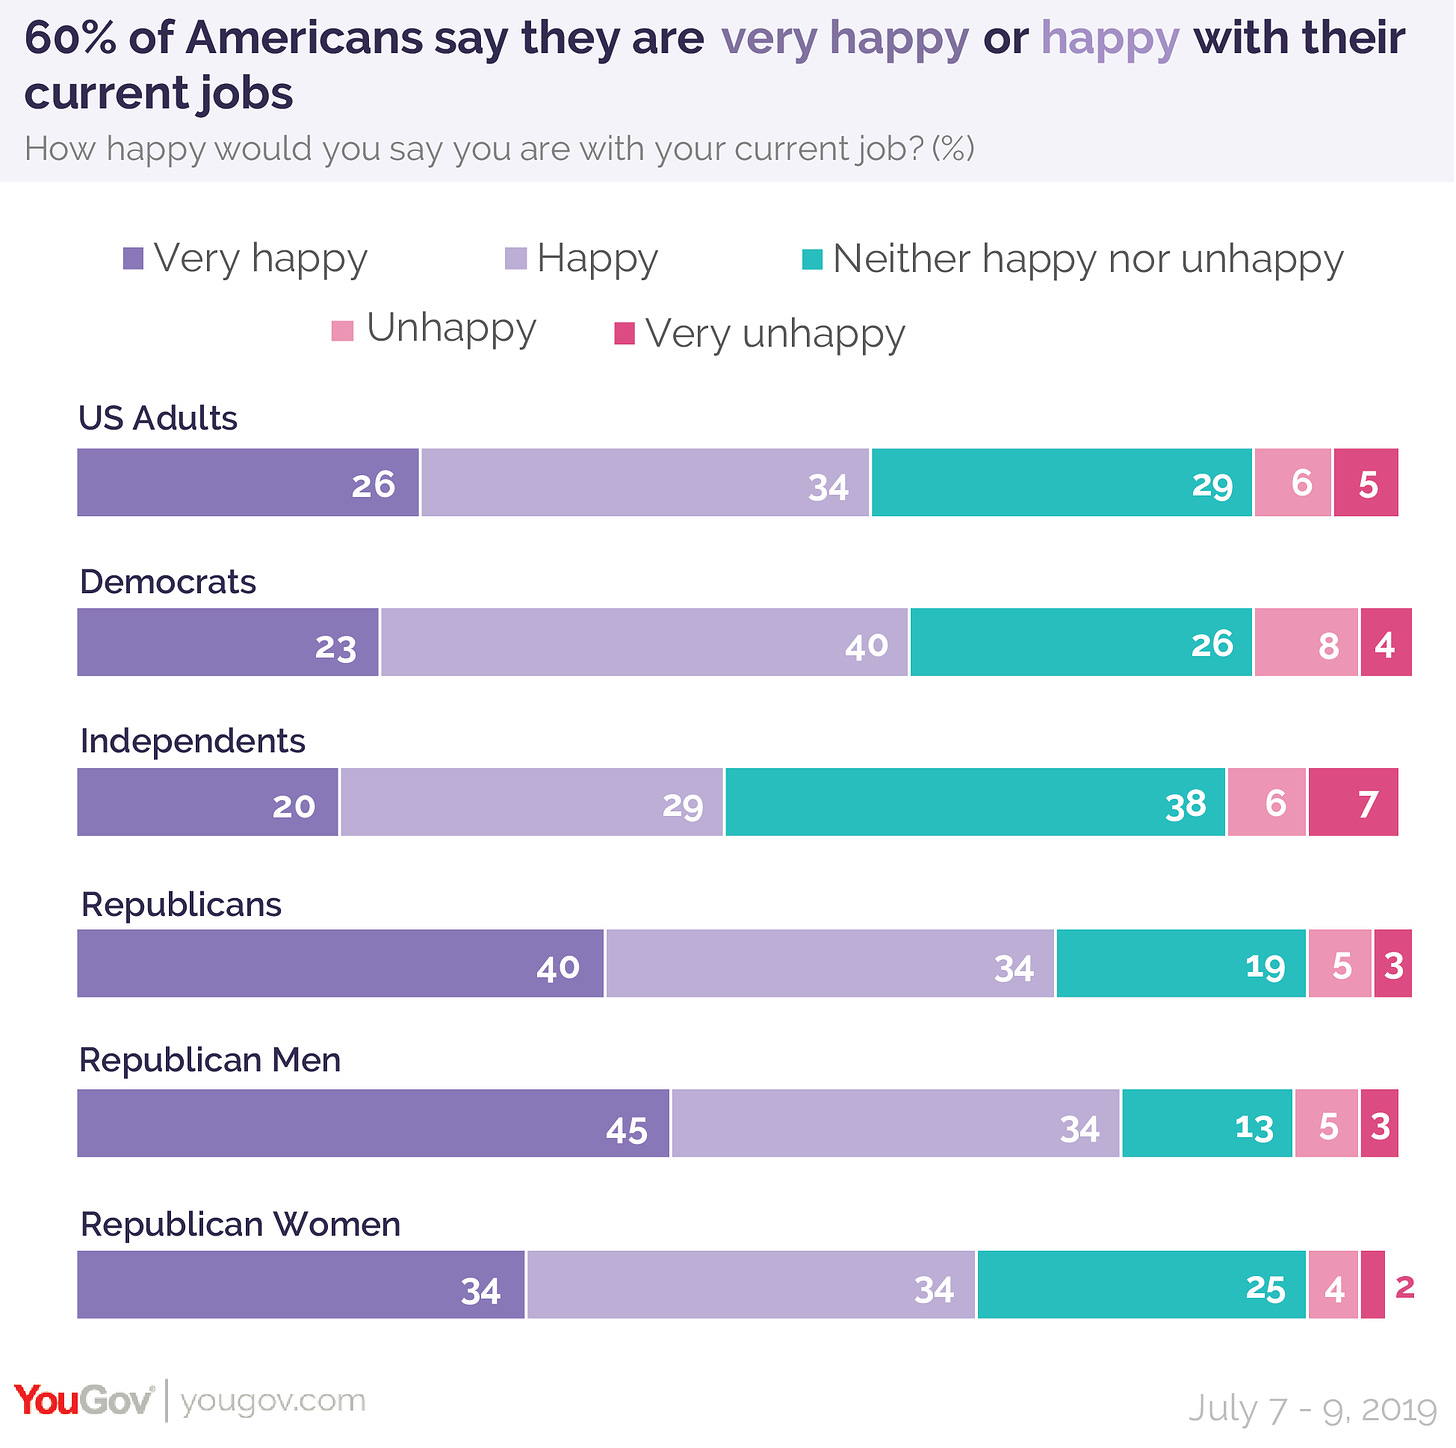 60% of Americans say they are very happy or happy with their current jobs